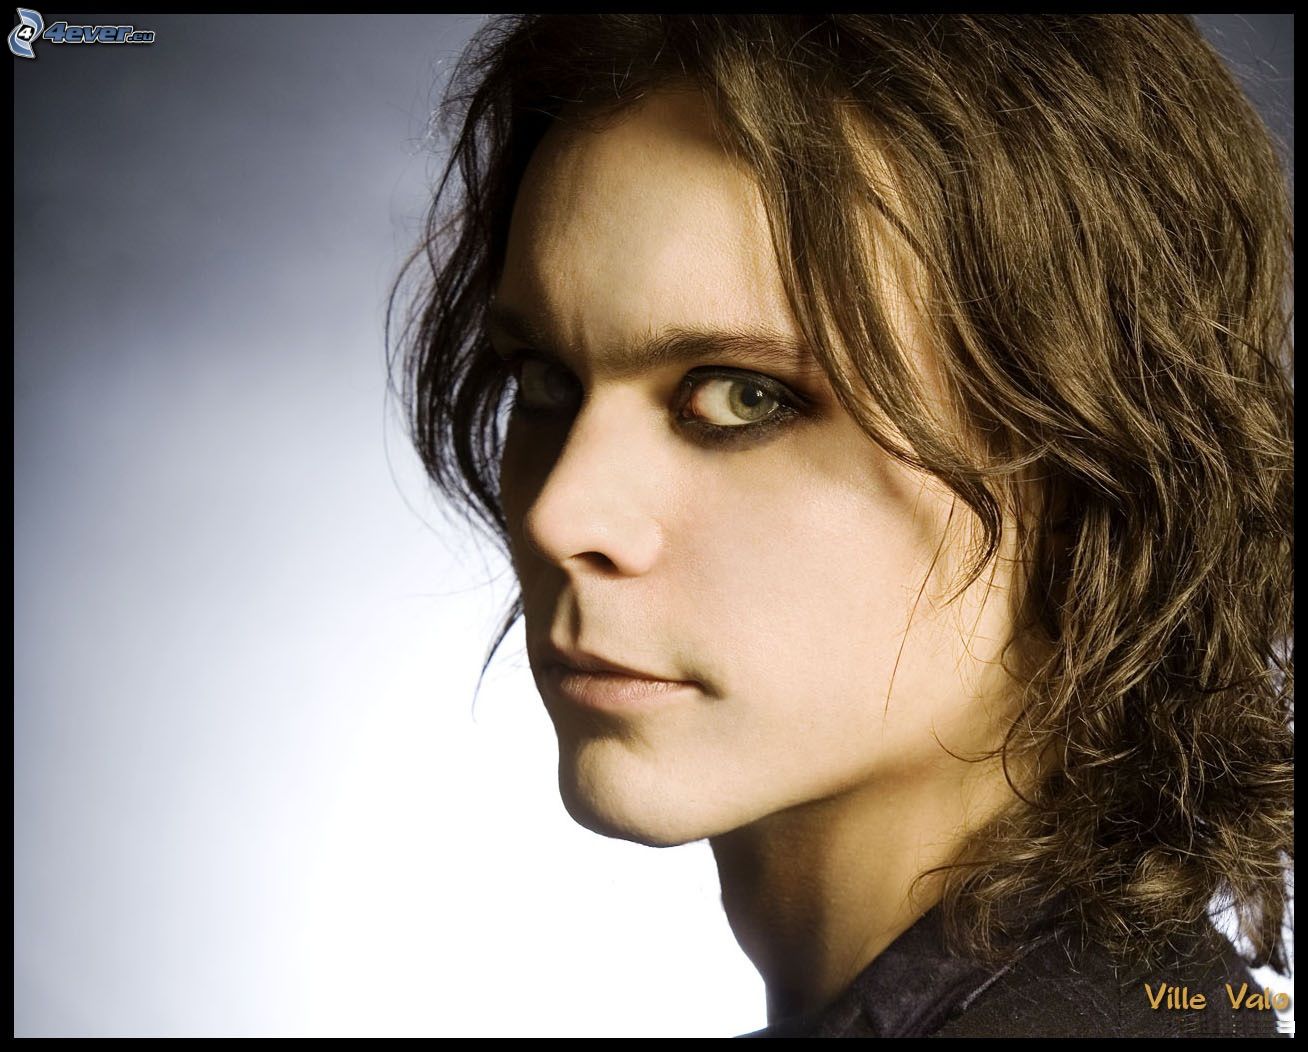 1308x1052 > Ville Valo Wallpapers